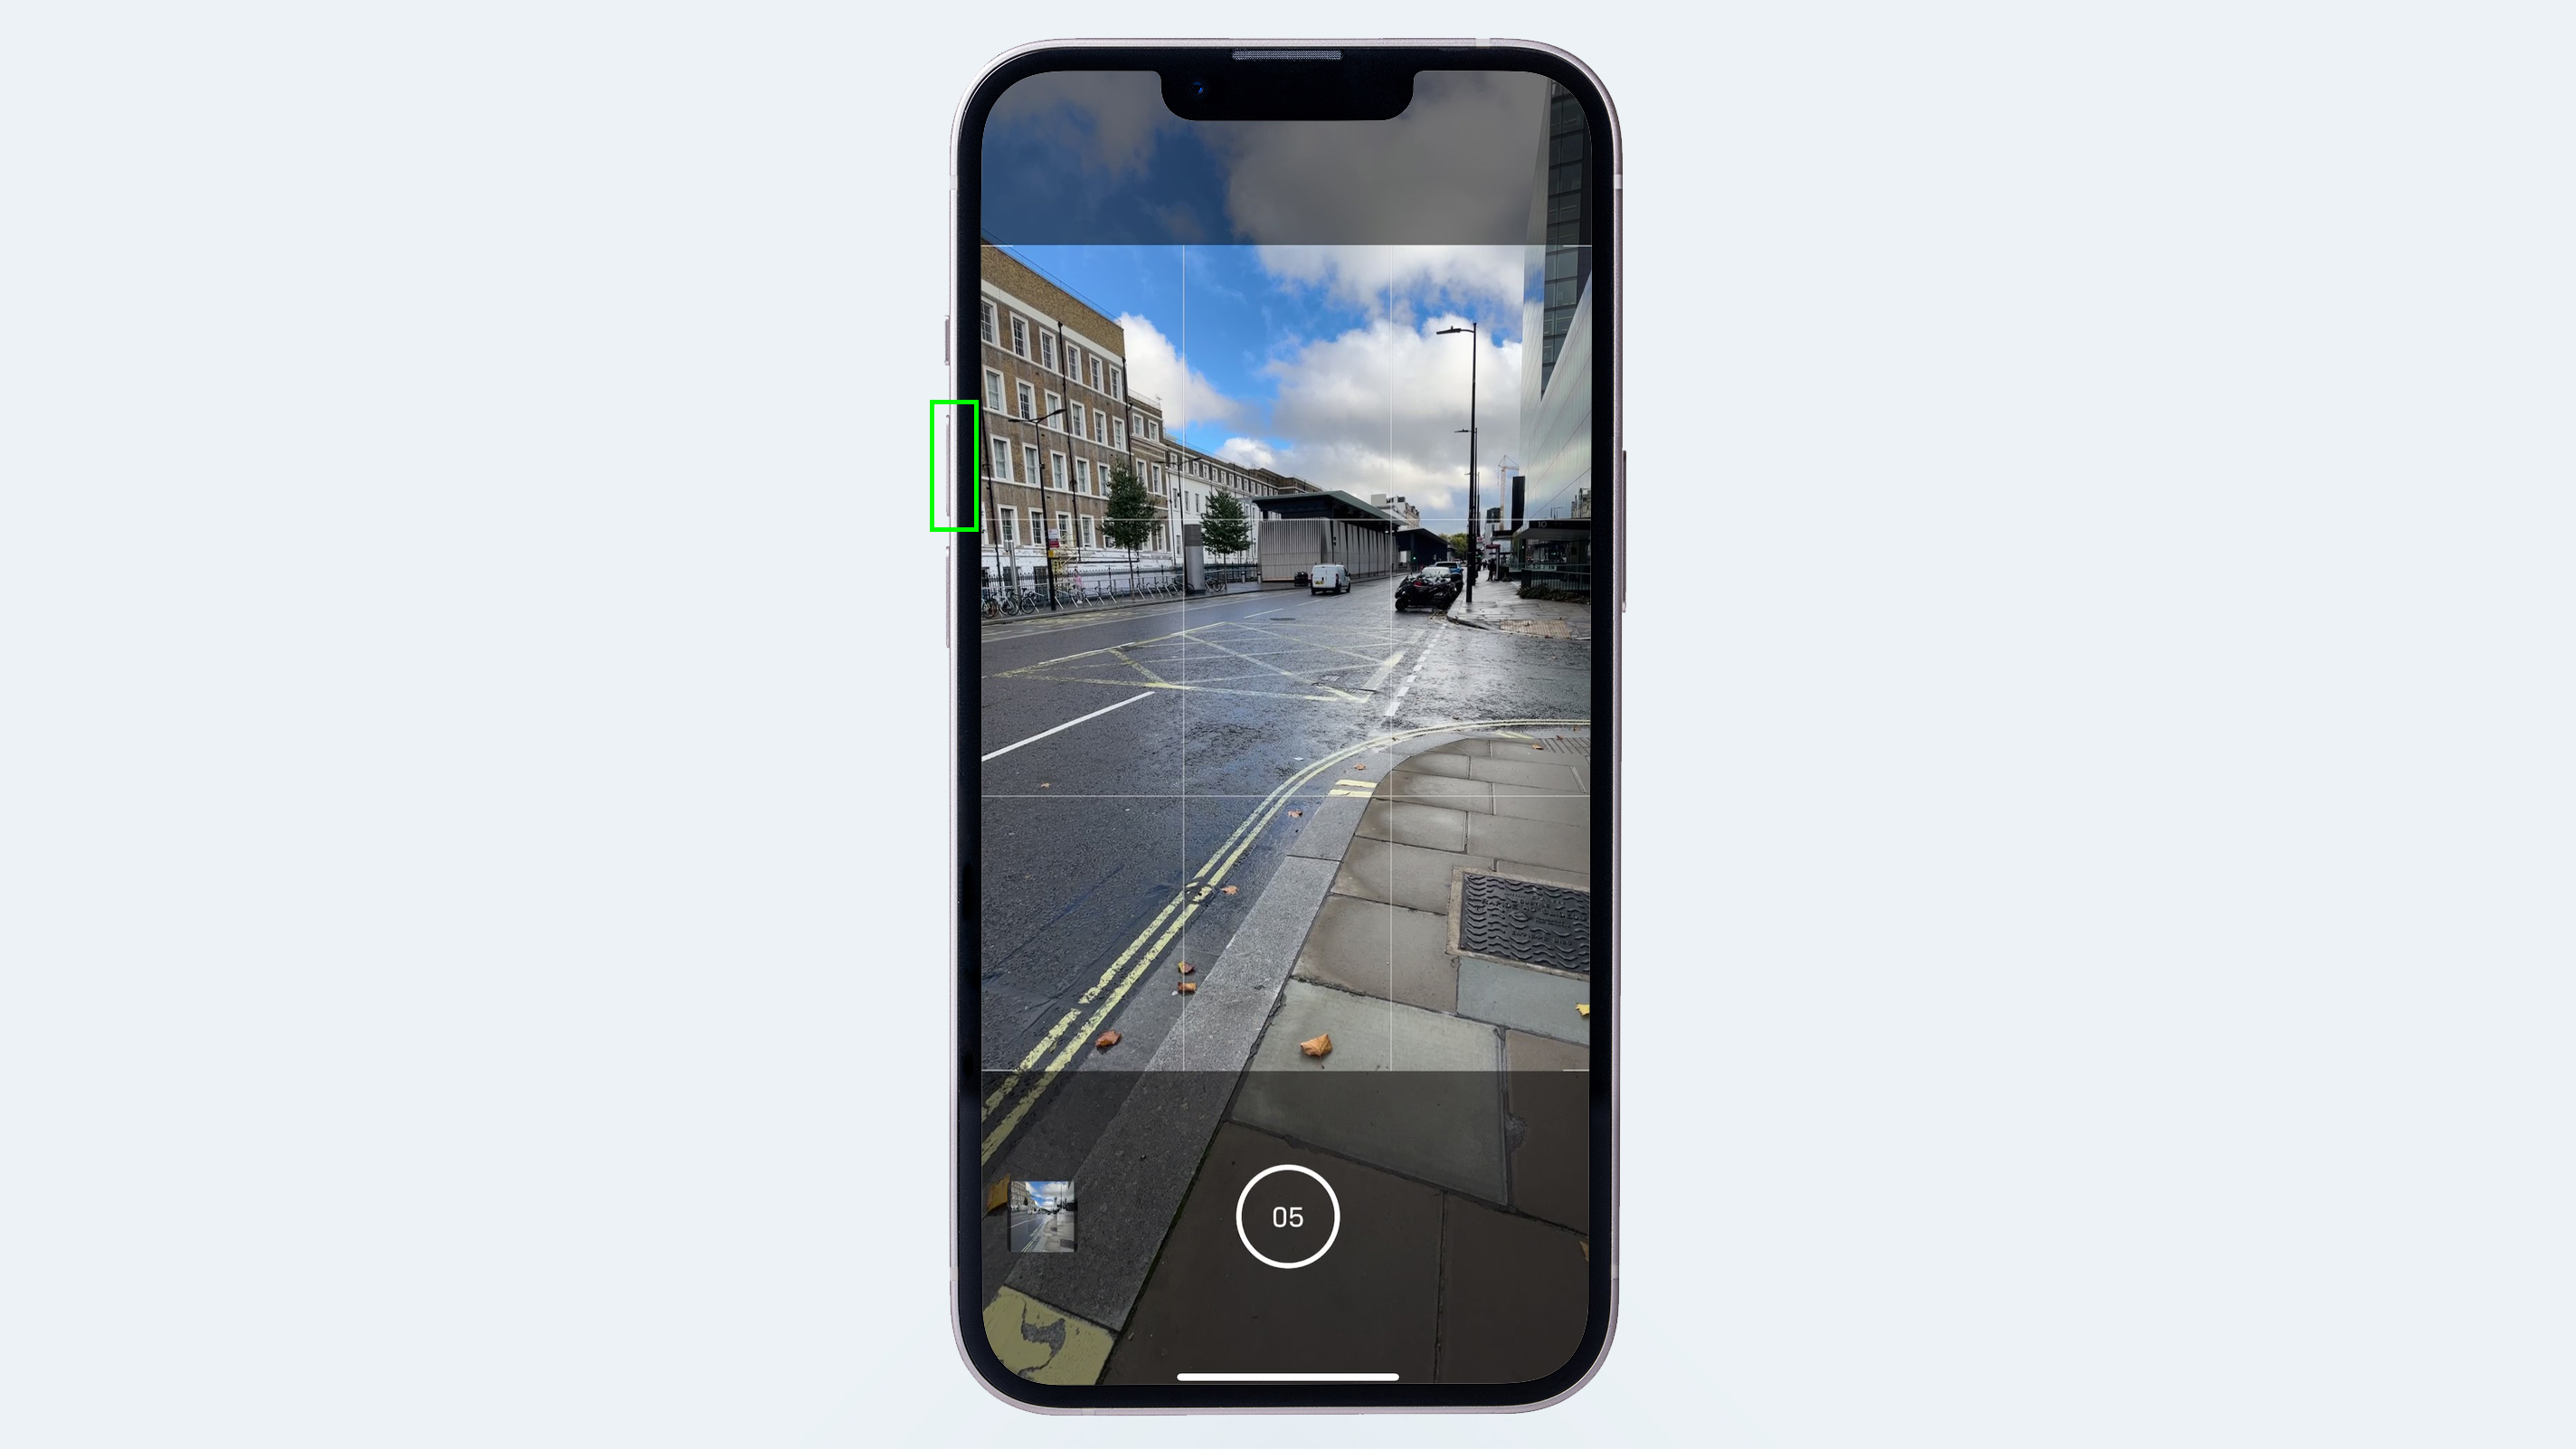 Two screenshots showing how to take burst photos in the iPhone Camera app using the volume buttons